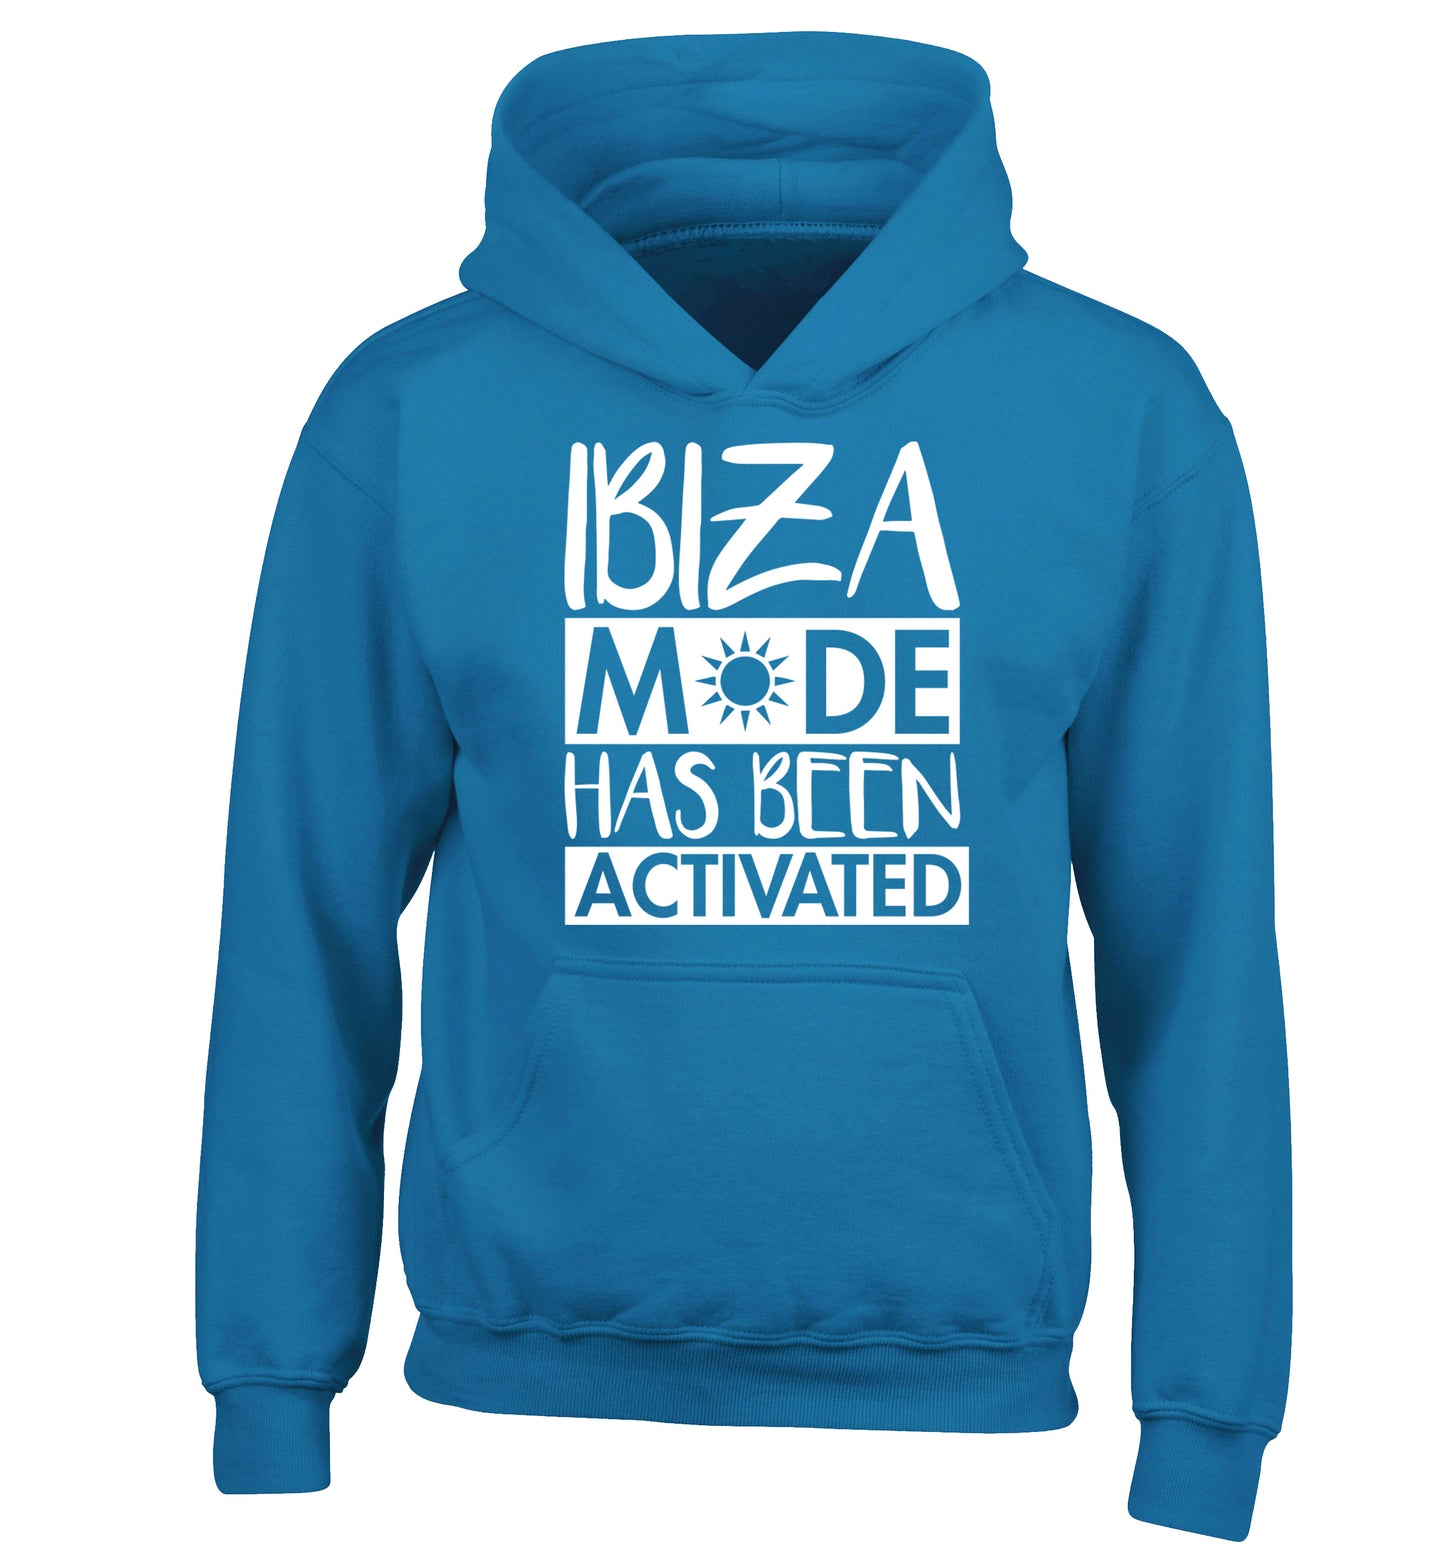 Ibiza mode has been activated children's blue hoodie 12-13 Years